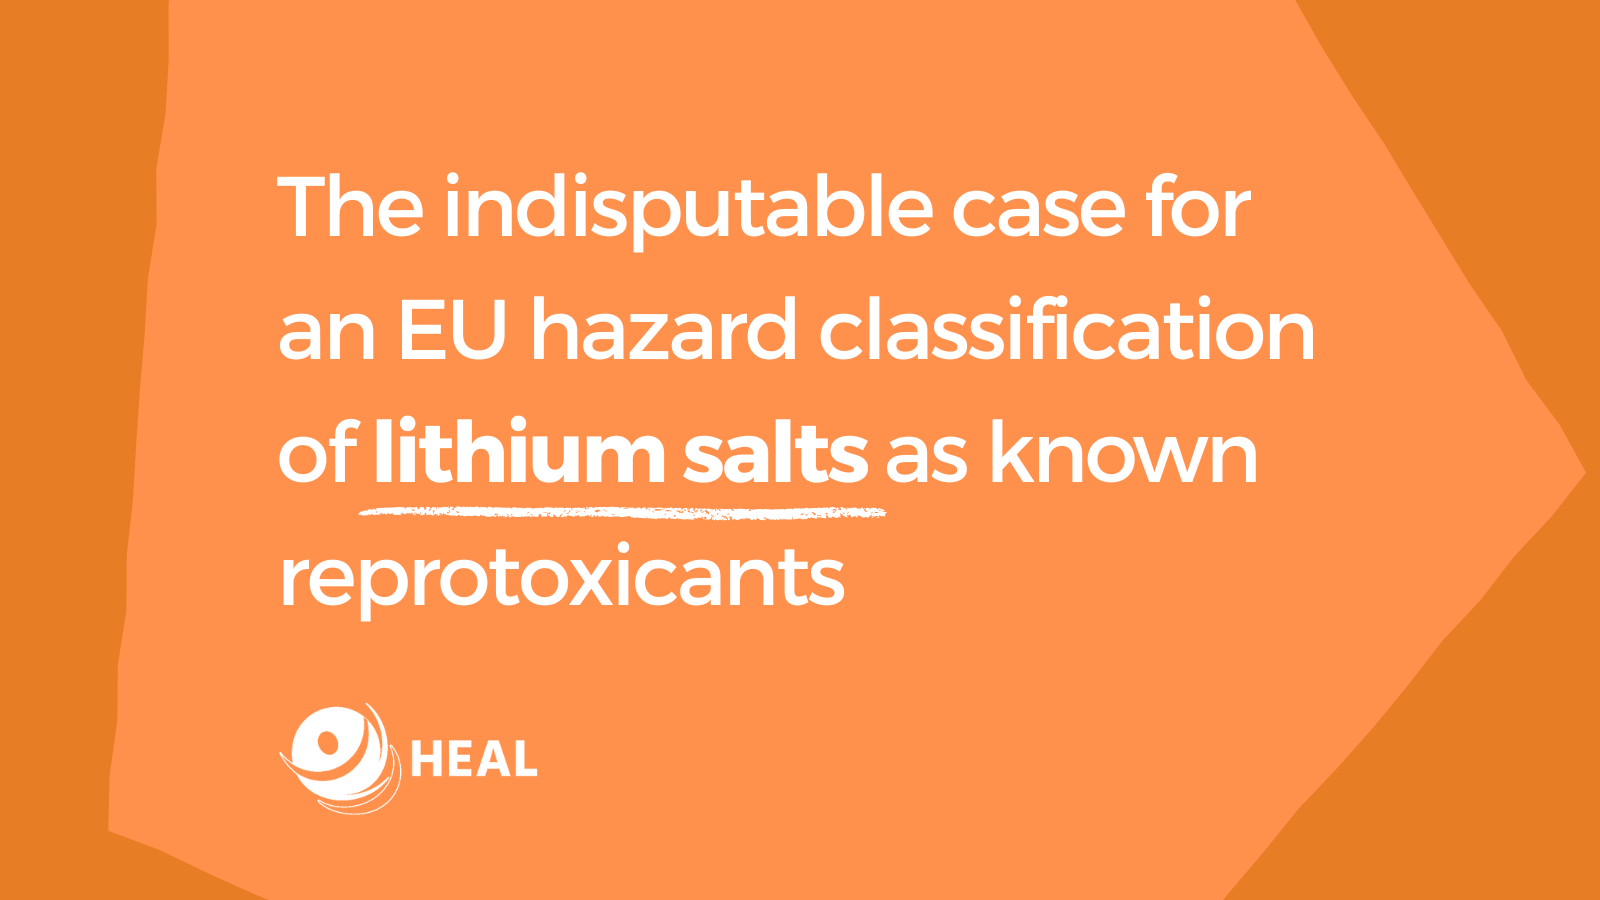 The indisputable case for an EU hazard classification of lithium salts as known reprotoxicants